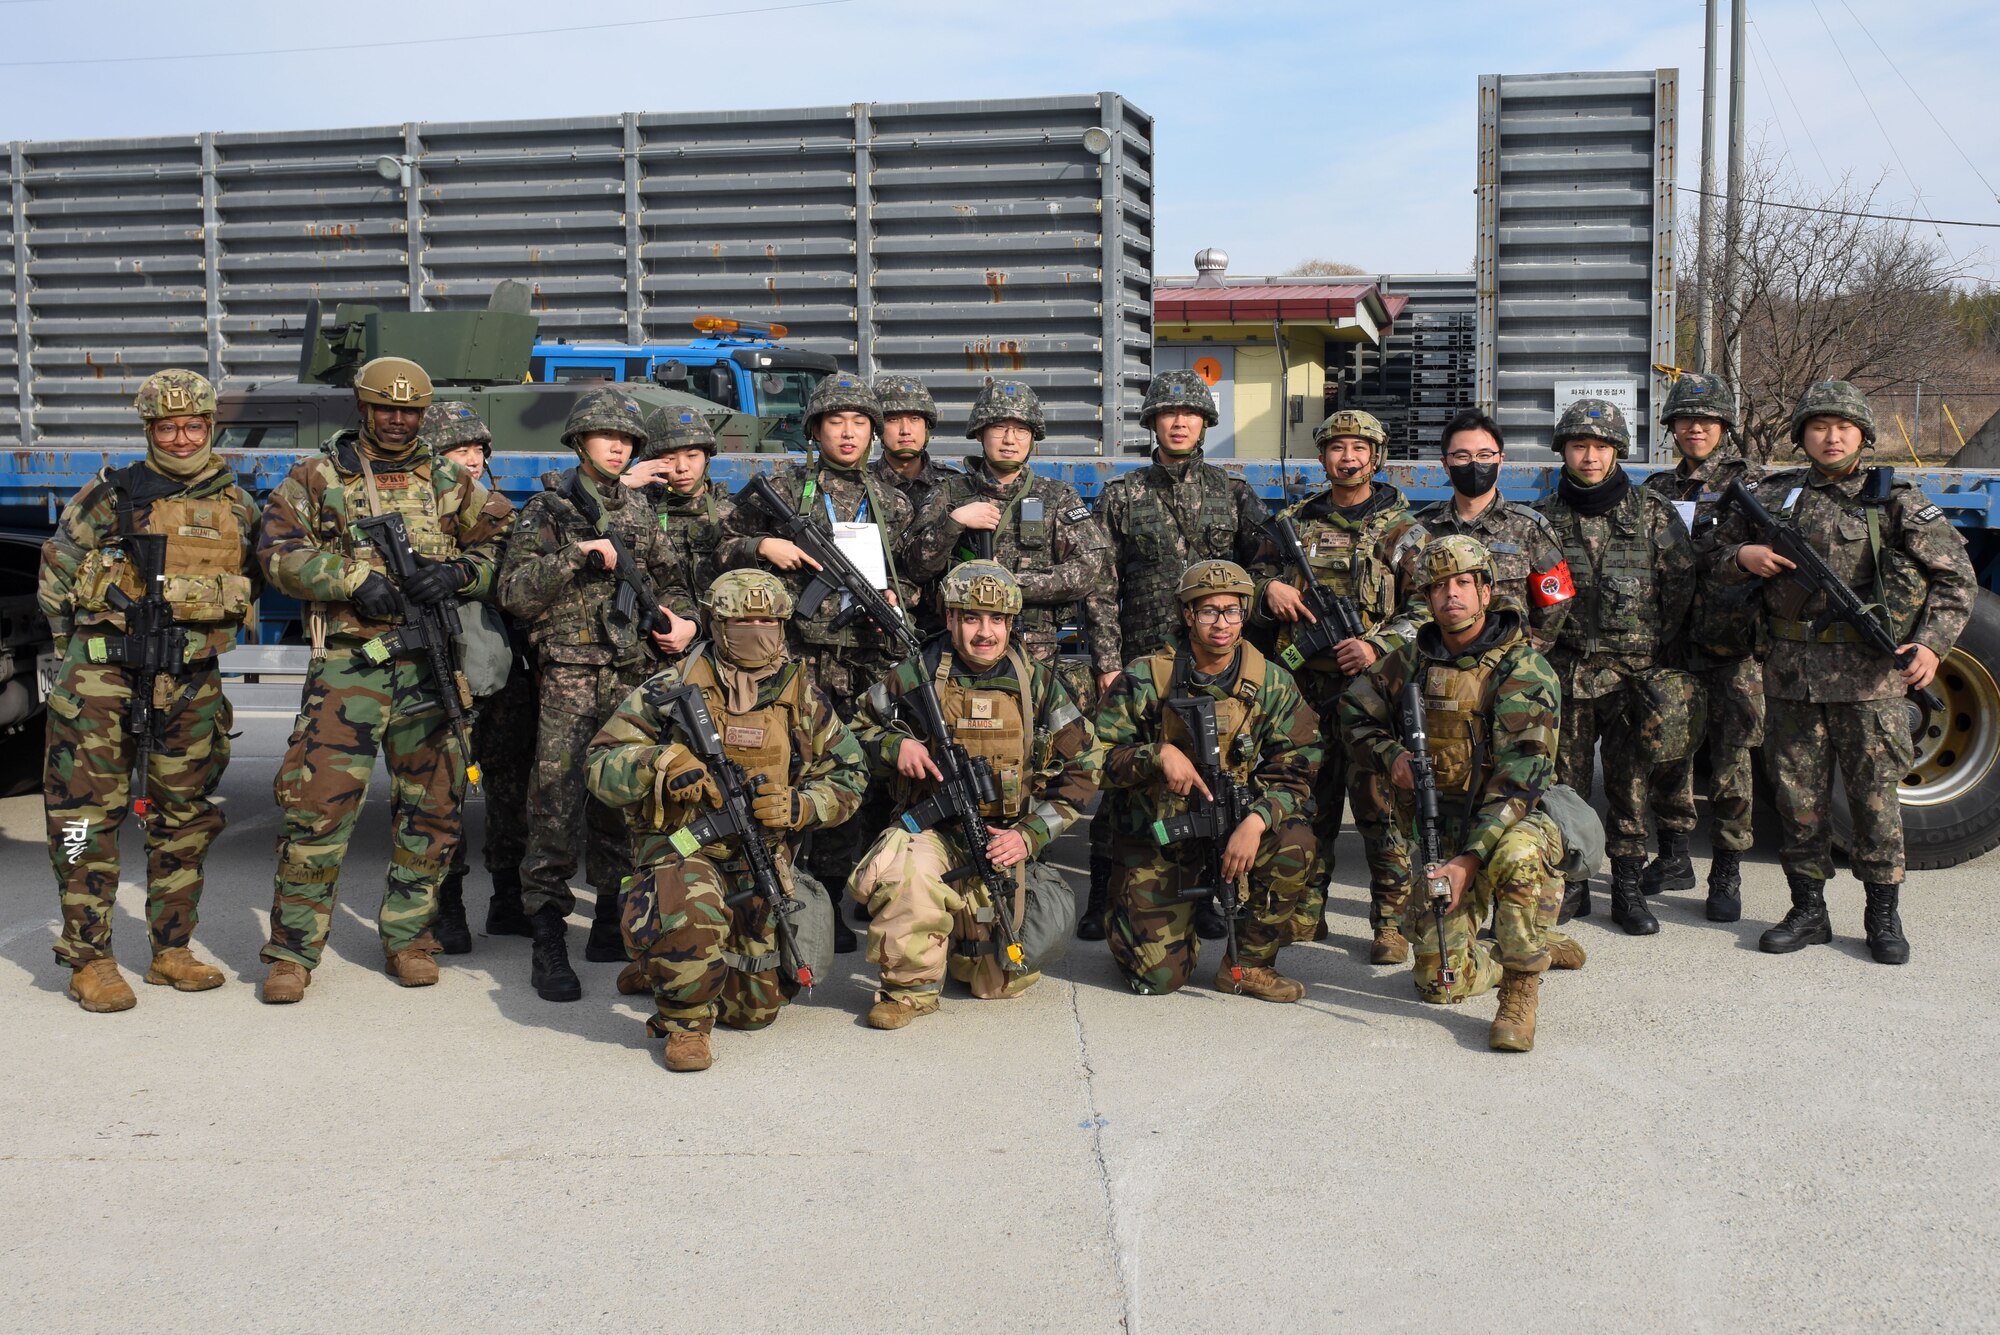 Military police officers and logistics personnel from the Republic of Korea (ROK) Air Force 38th Fighter Group and defenders from the U.S. Air Force 8th Security Forces squadron pose for a photo after a simulated munitions transport training event at Kunsan Air Base, ROK, Feb. 6, 2023. A testament to their interoperability, the two services delivered the simulated payload onto the installation and into the munition’s storage area. (U.S. Air Force photo by Senior Airman Akeem K. Campbell)